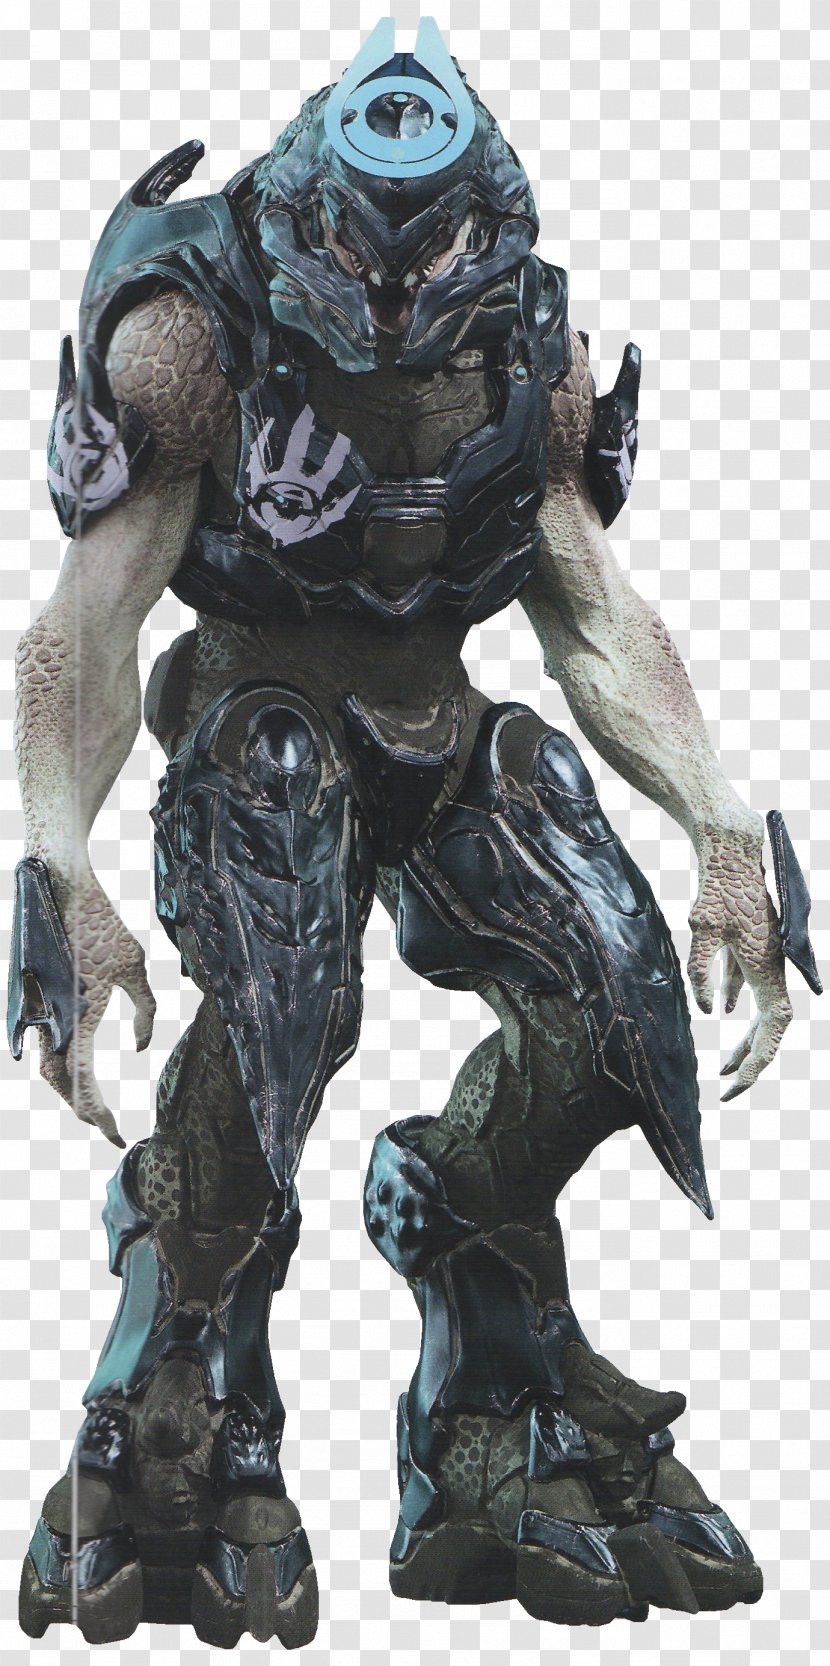 Halo 4 5: Guardians 2 Halo: The Master Chief Collection - Armour Transparent PNG